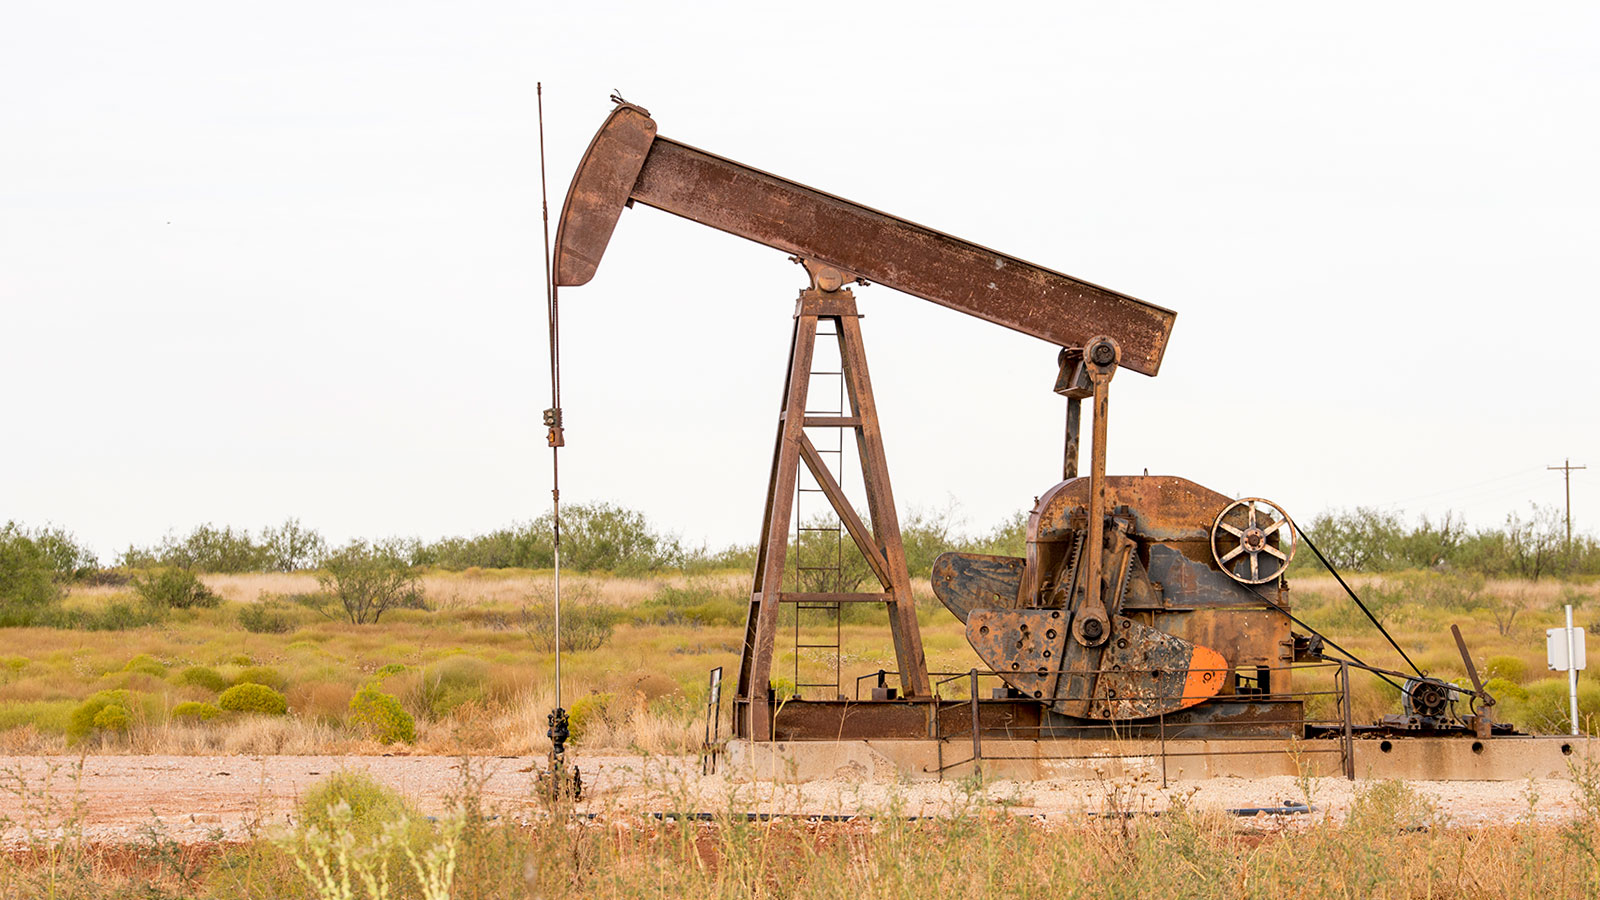 Photograph of a rusty oil pumpjack